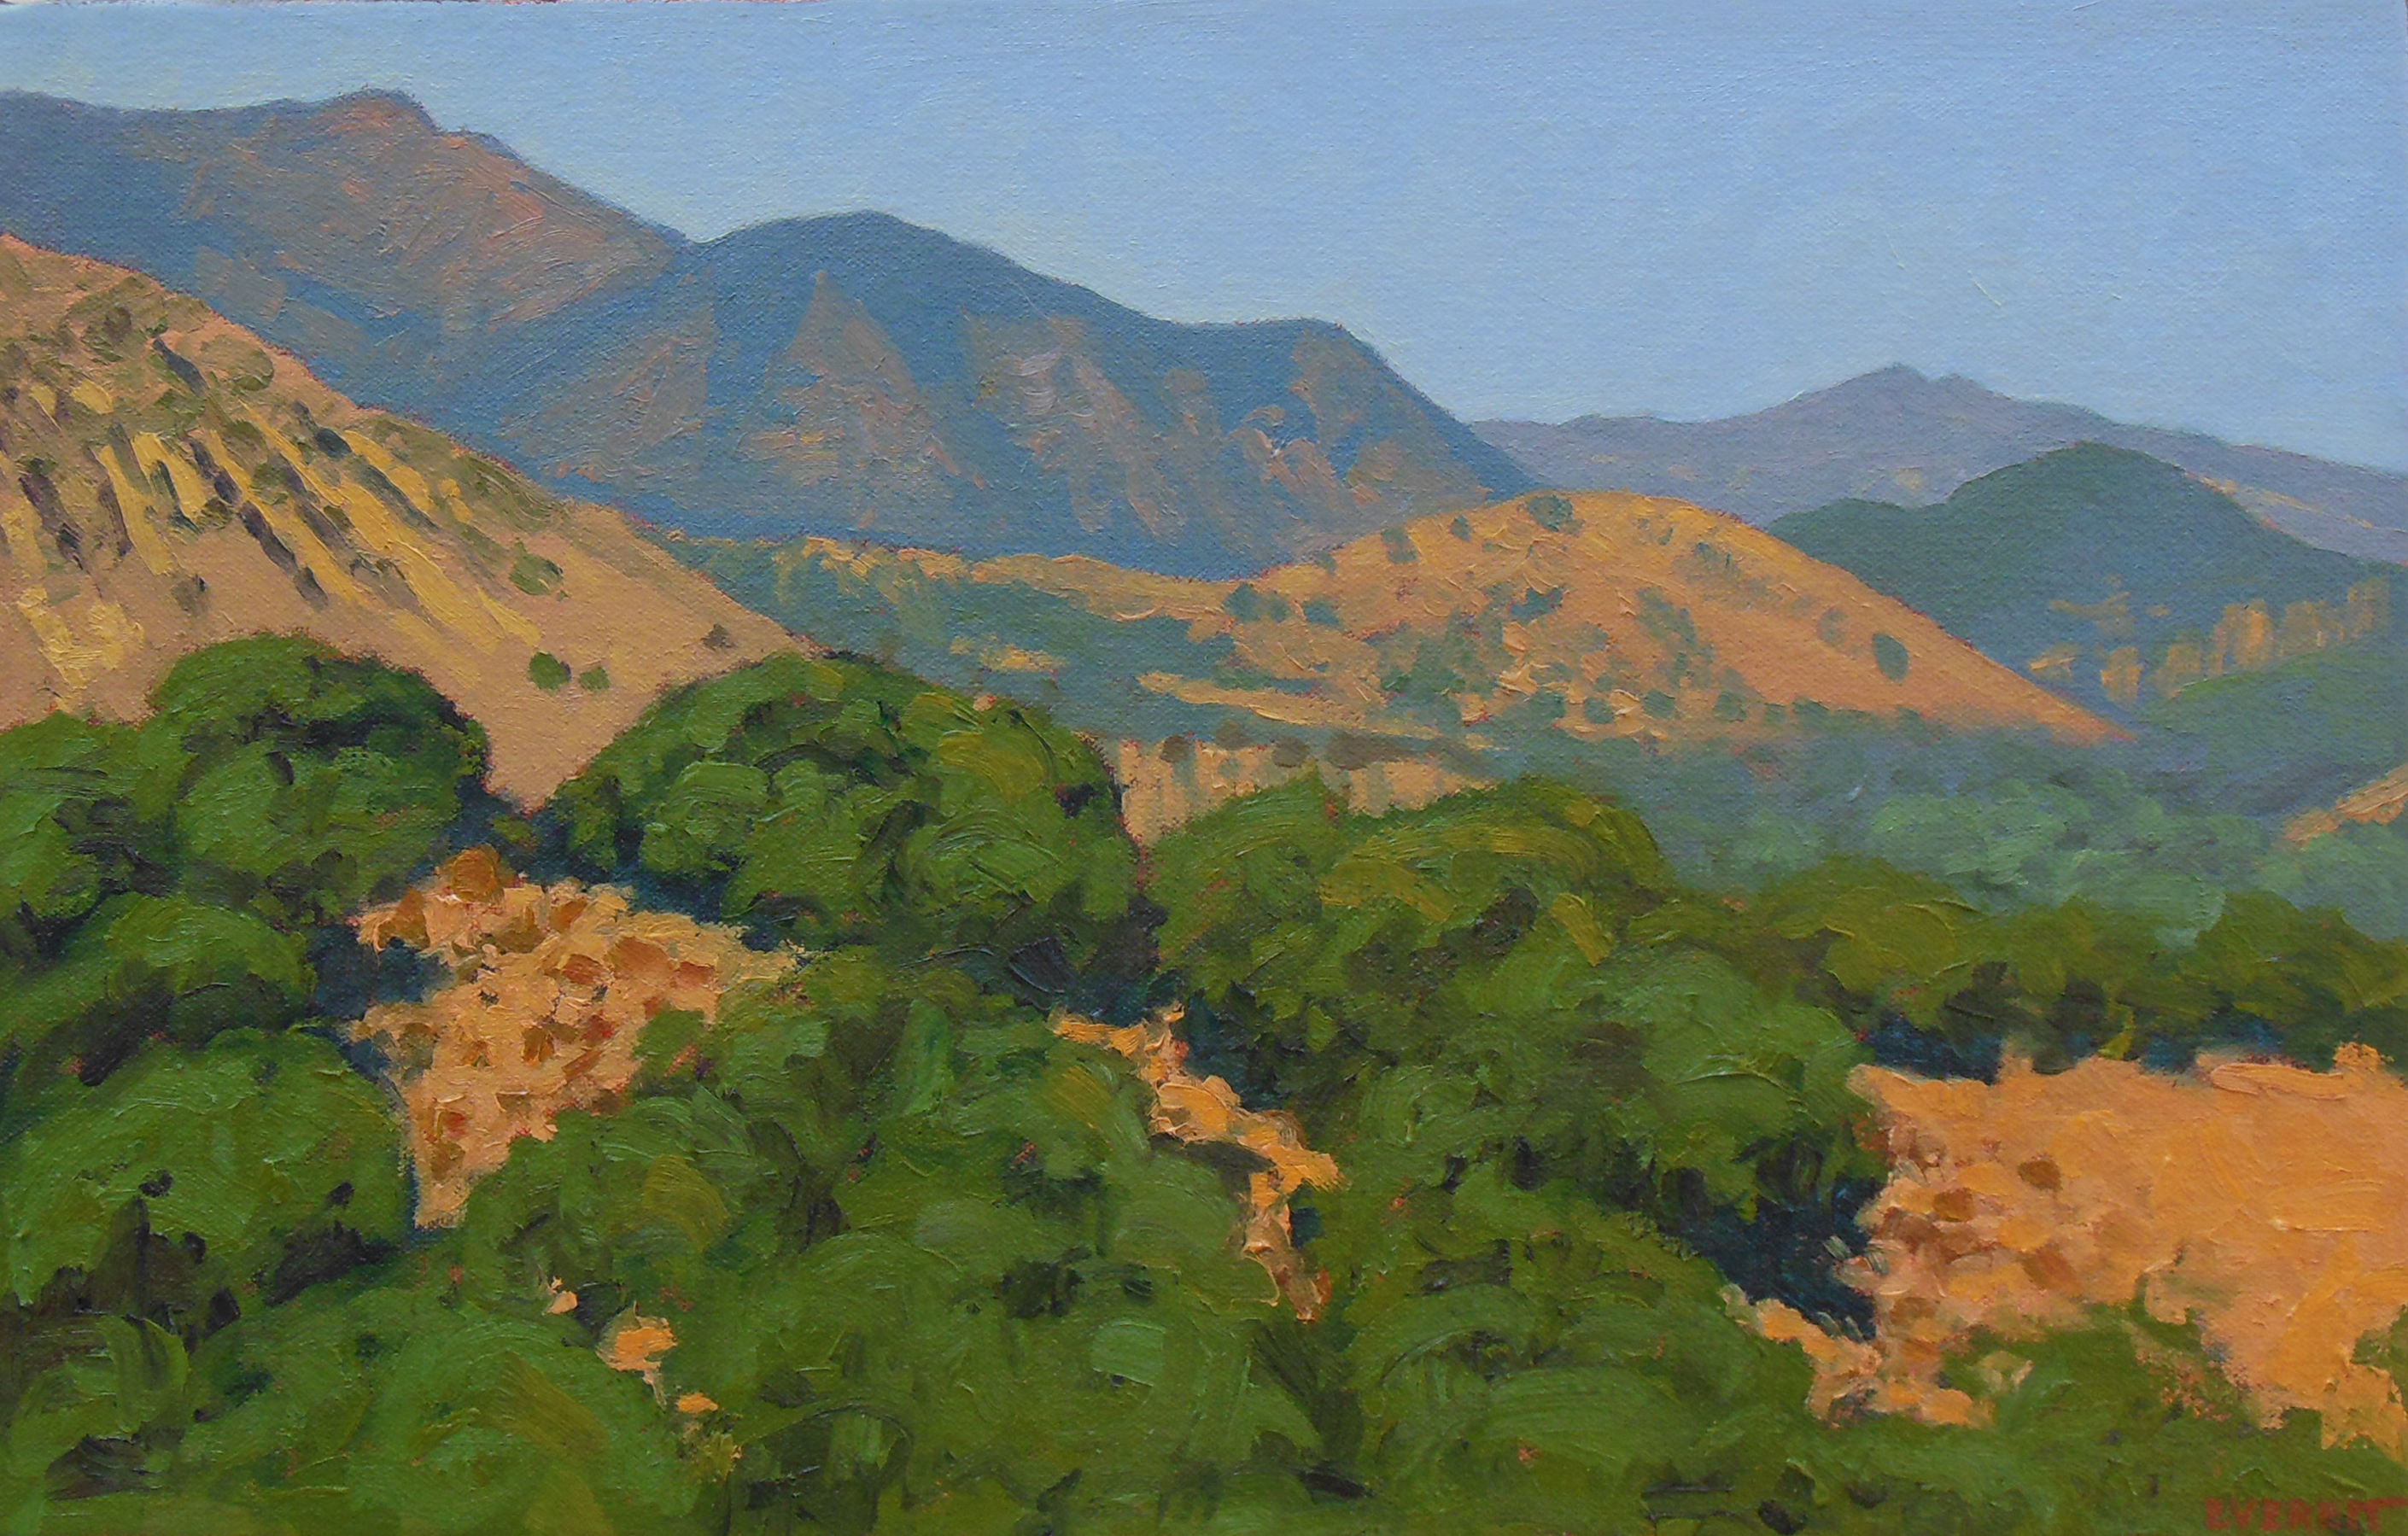 "View from Paradise Road" Bruce Everett, oil, 11" x 17" $750